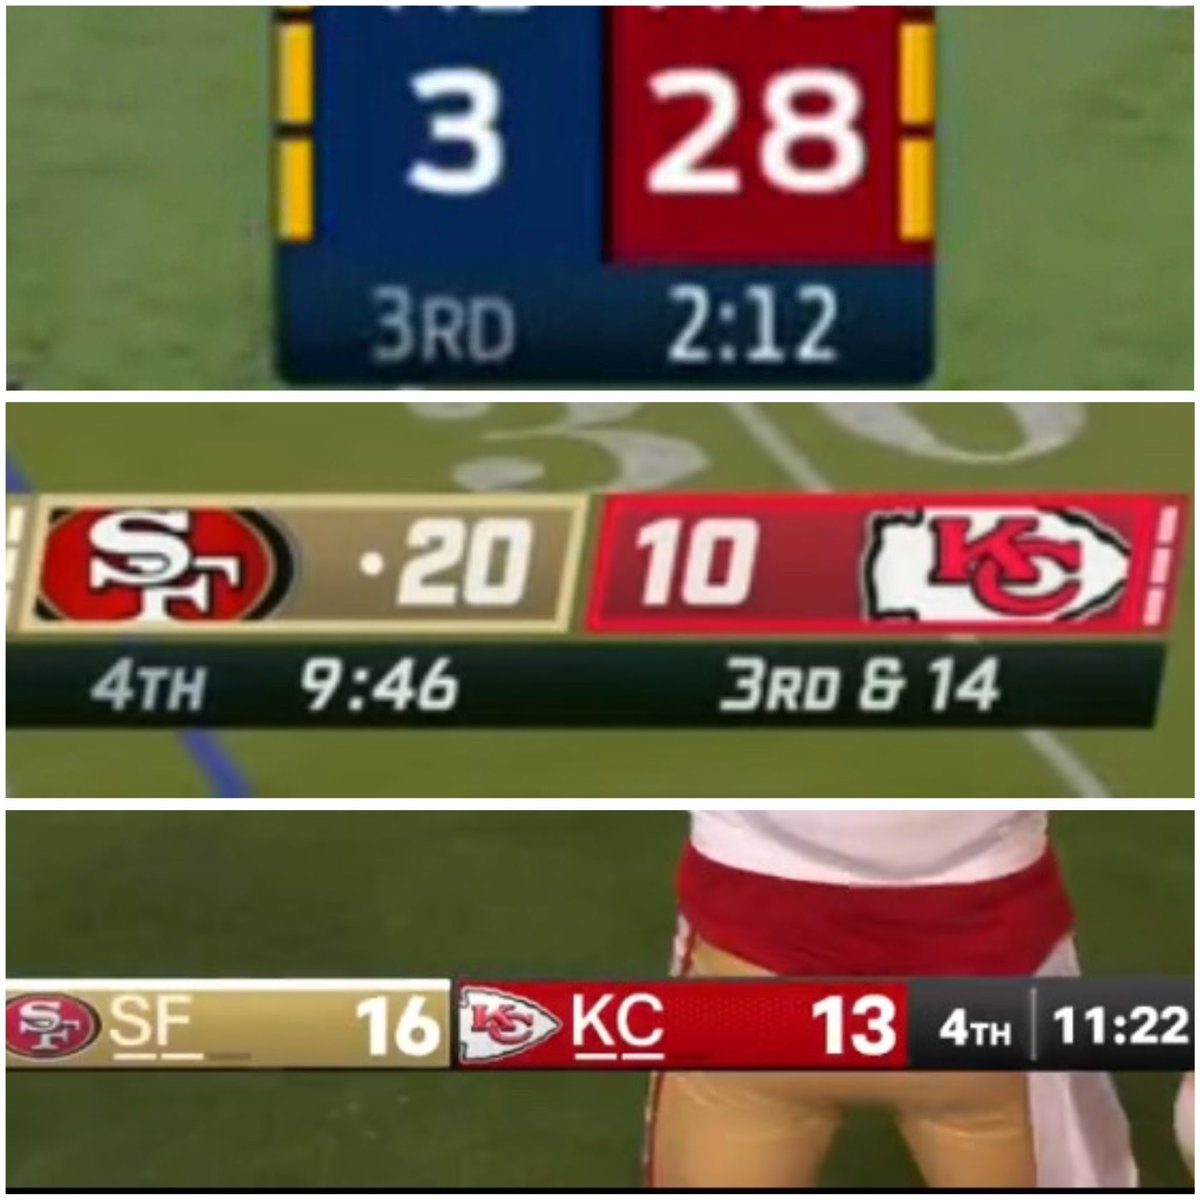 You’ll never guess who called plays for these teams